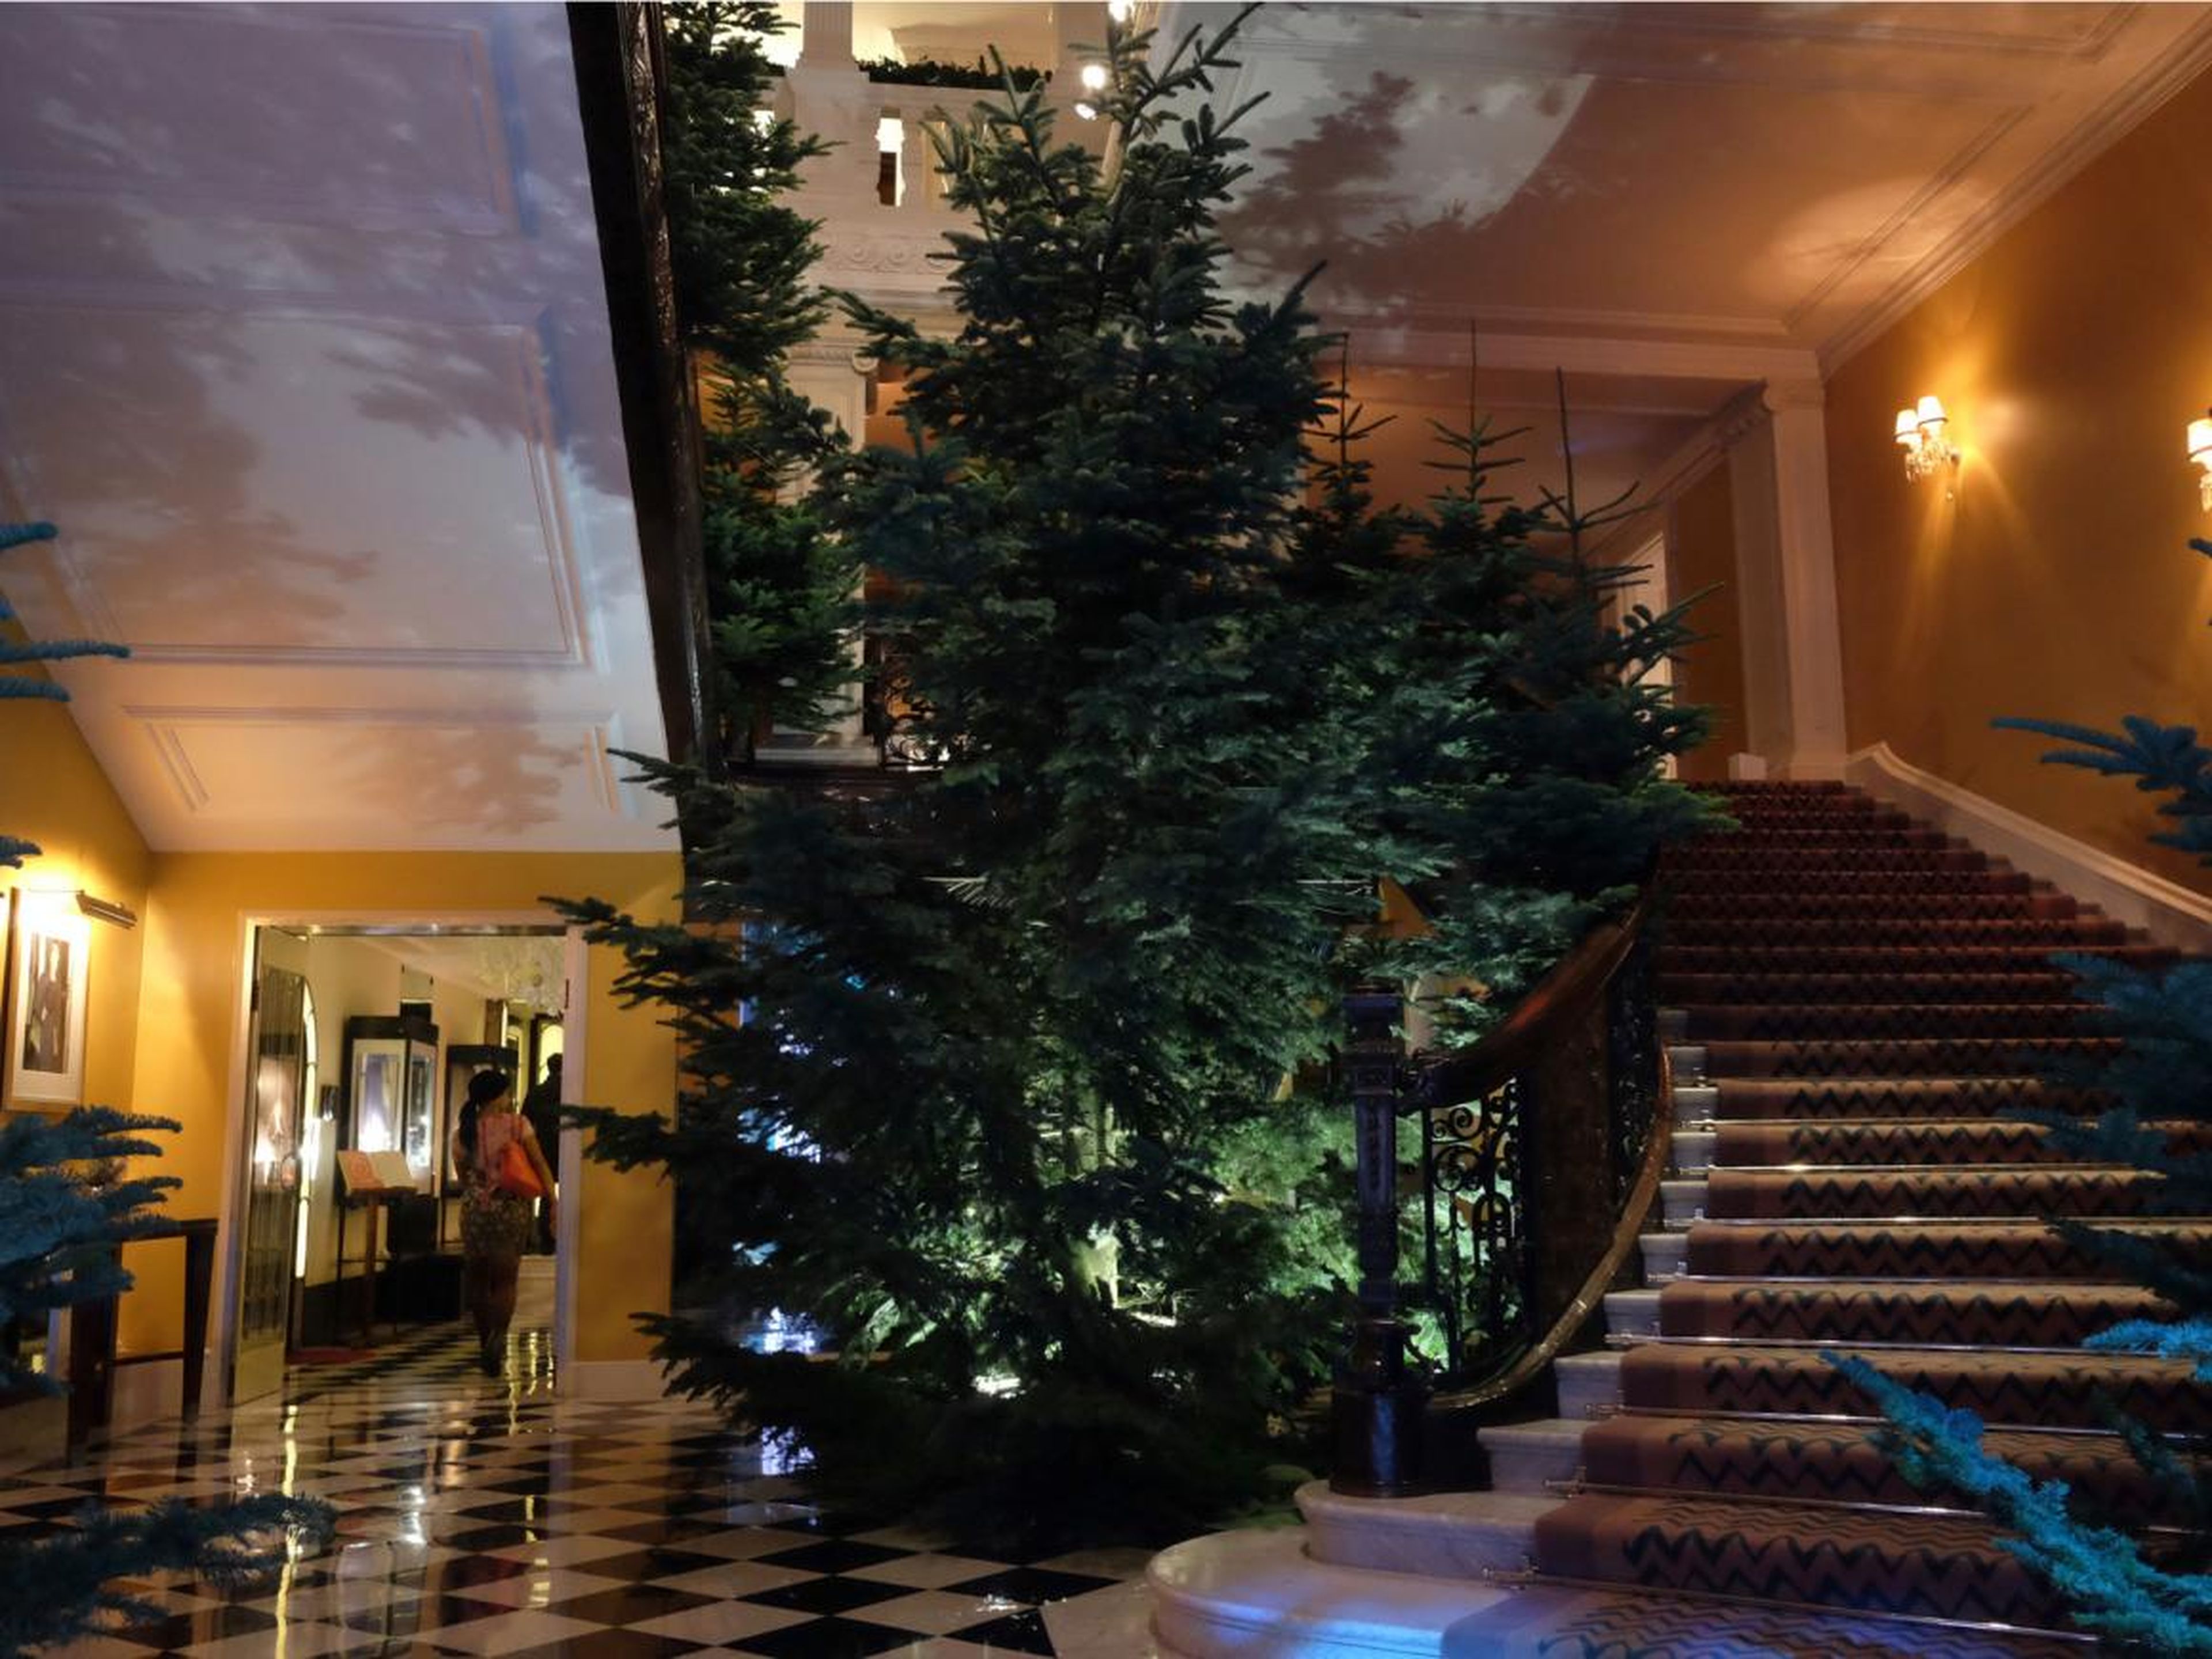 Ive designed a Christmas tree without any decorations for the Claridges hotel in London.